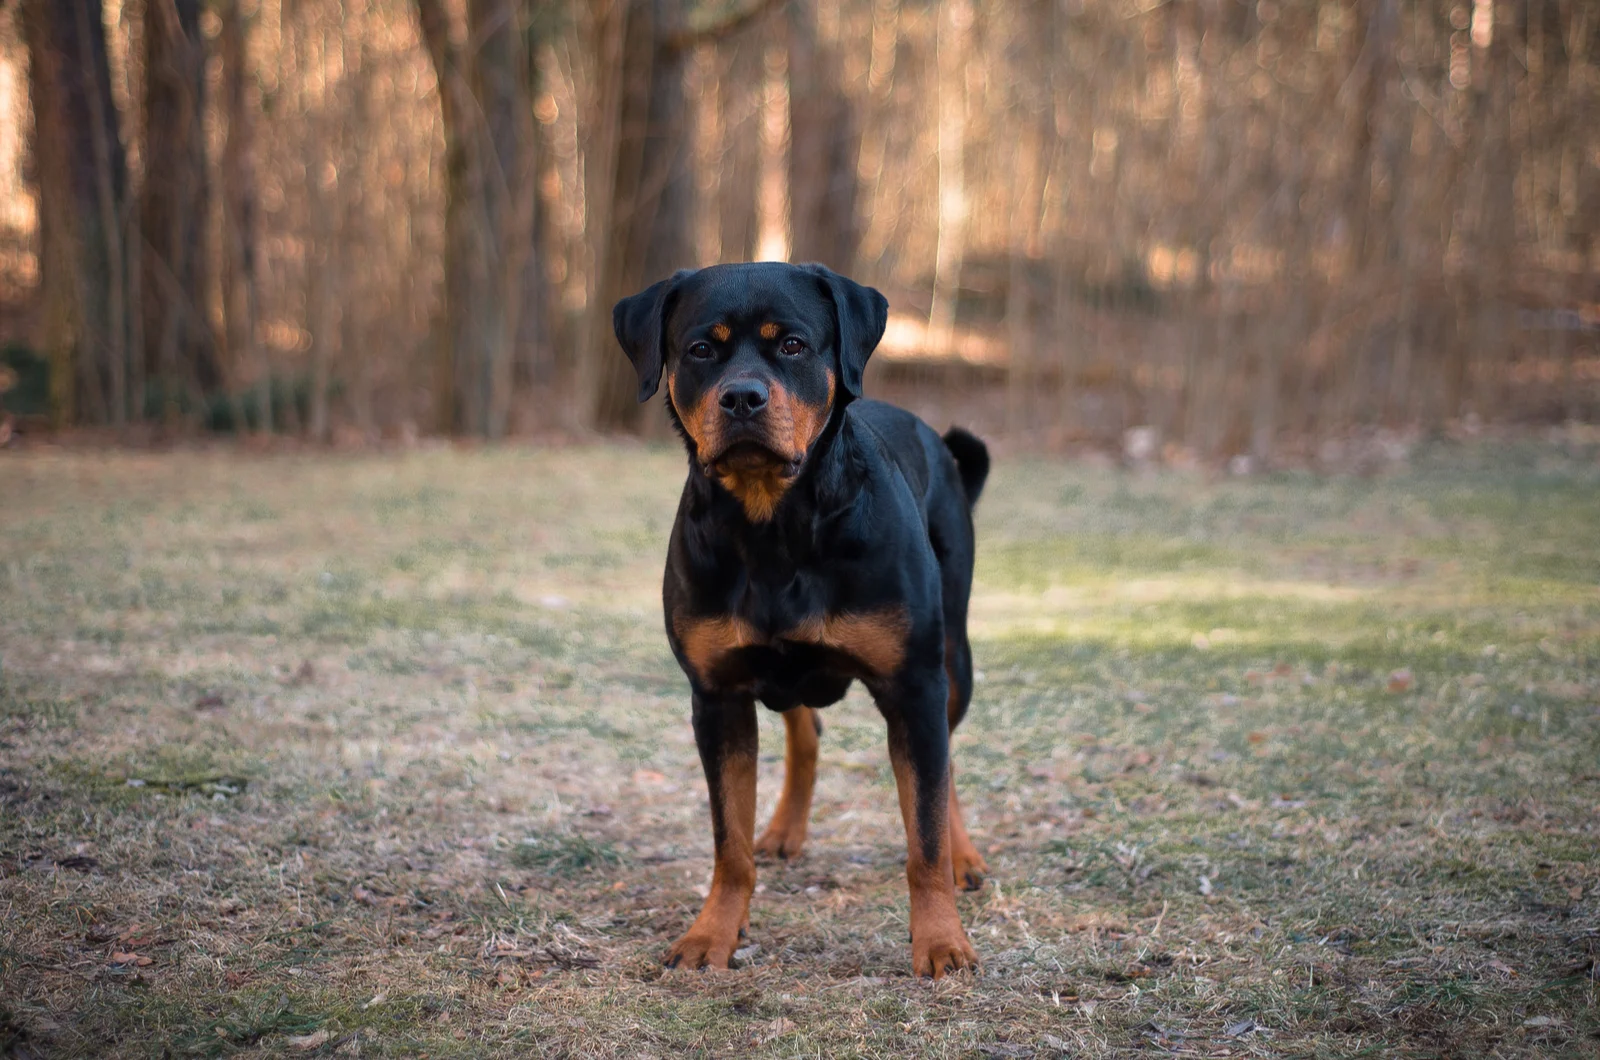 A Rottweiler puppy stands in the woods